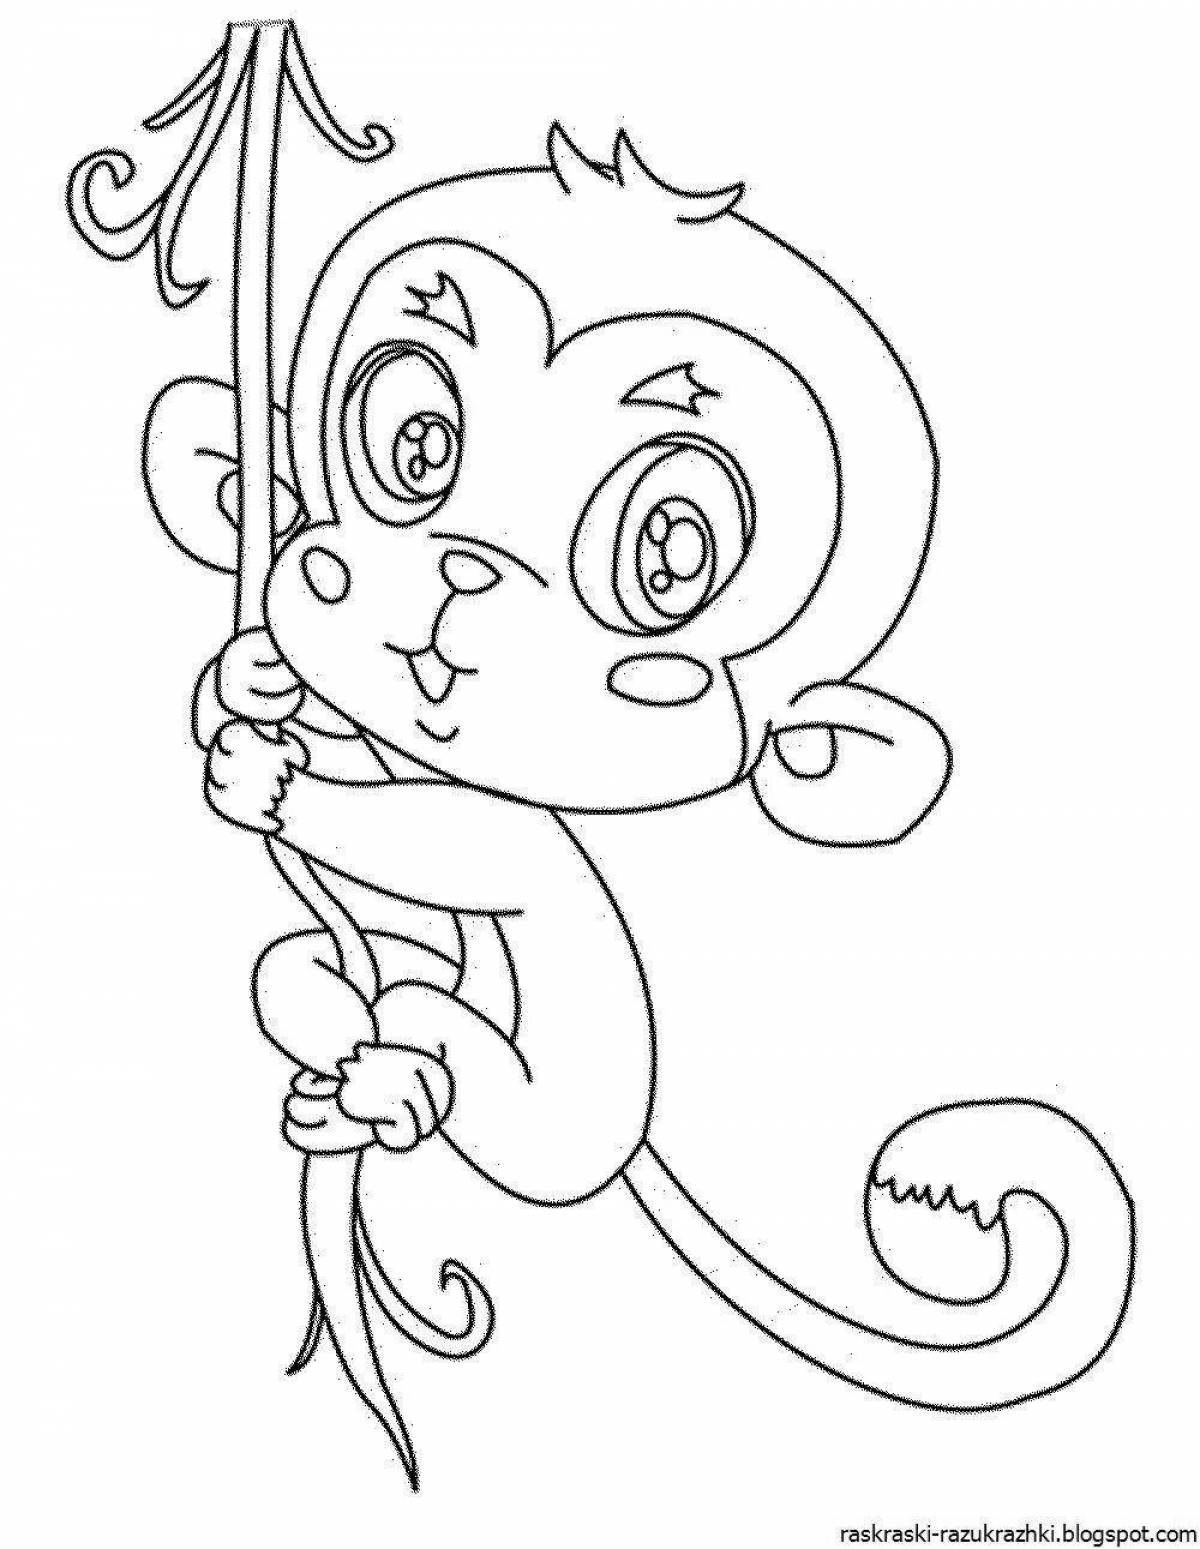 Playful monkey drawing for kids